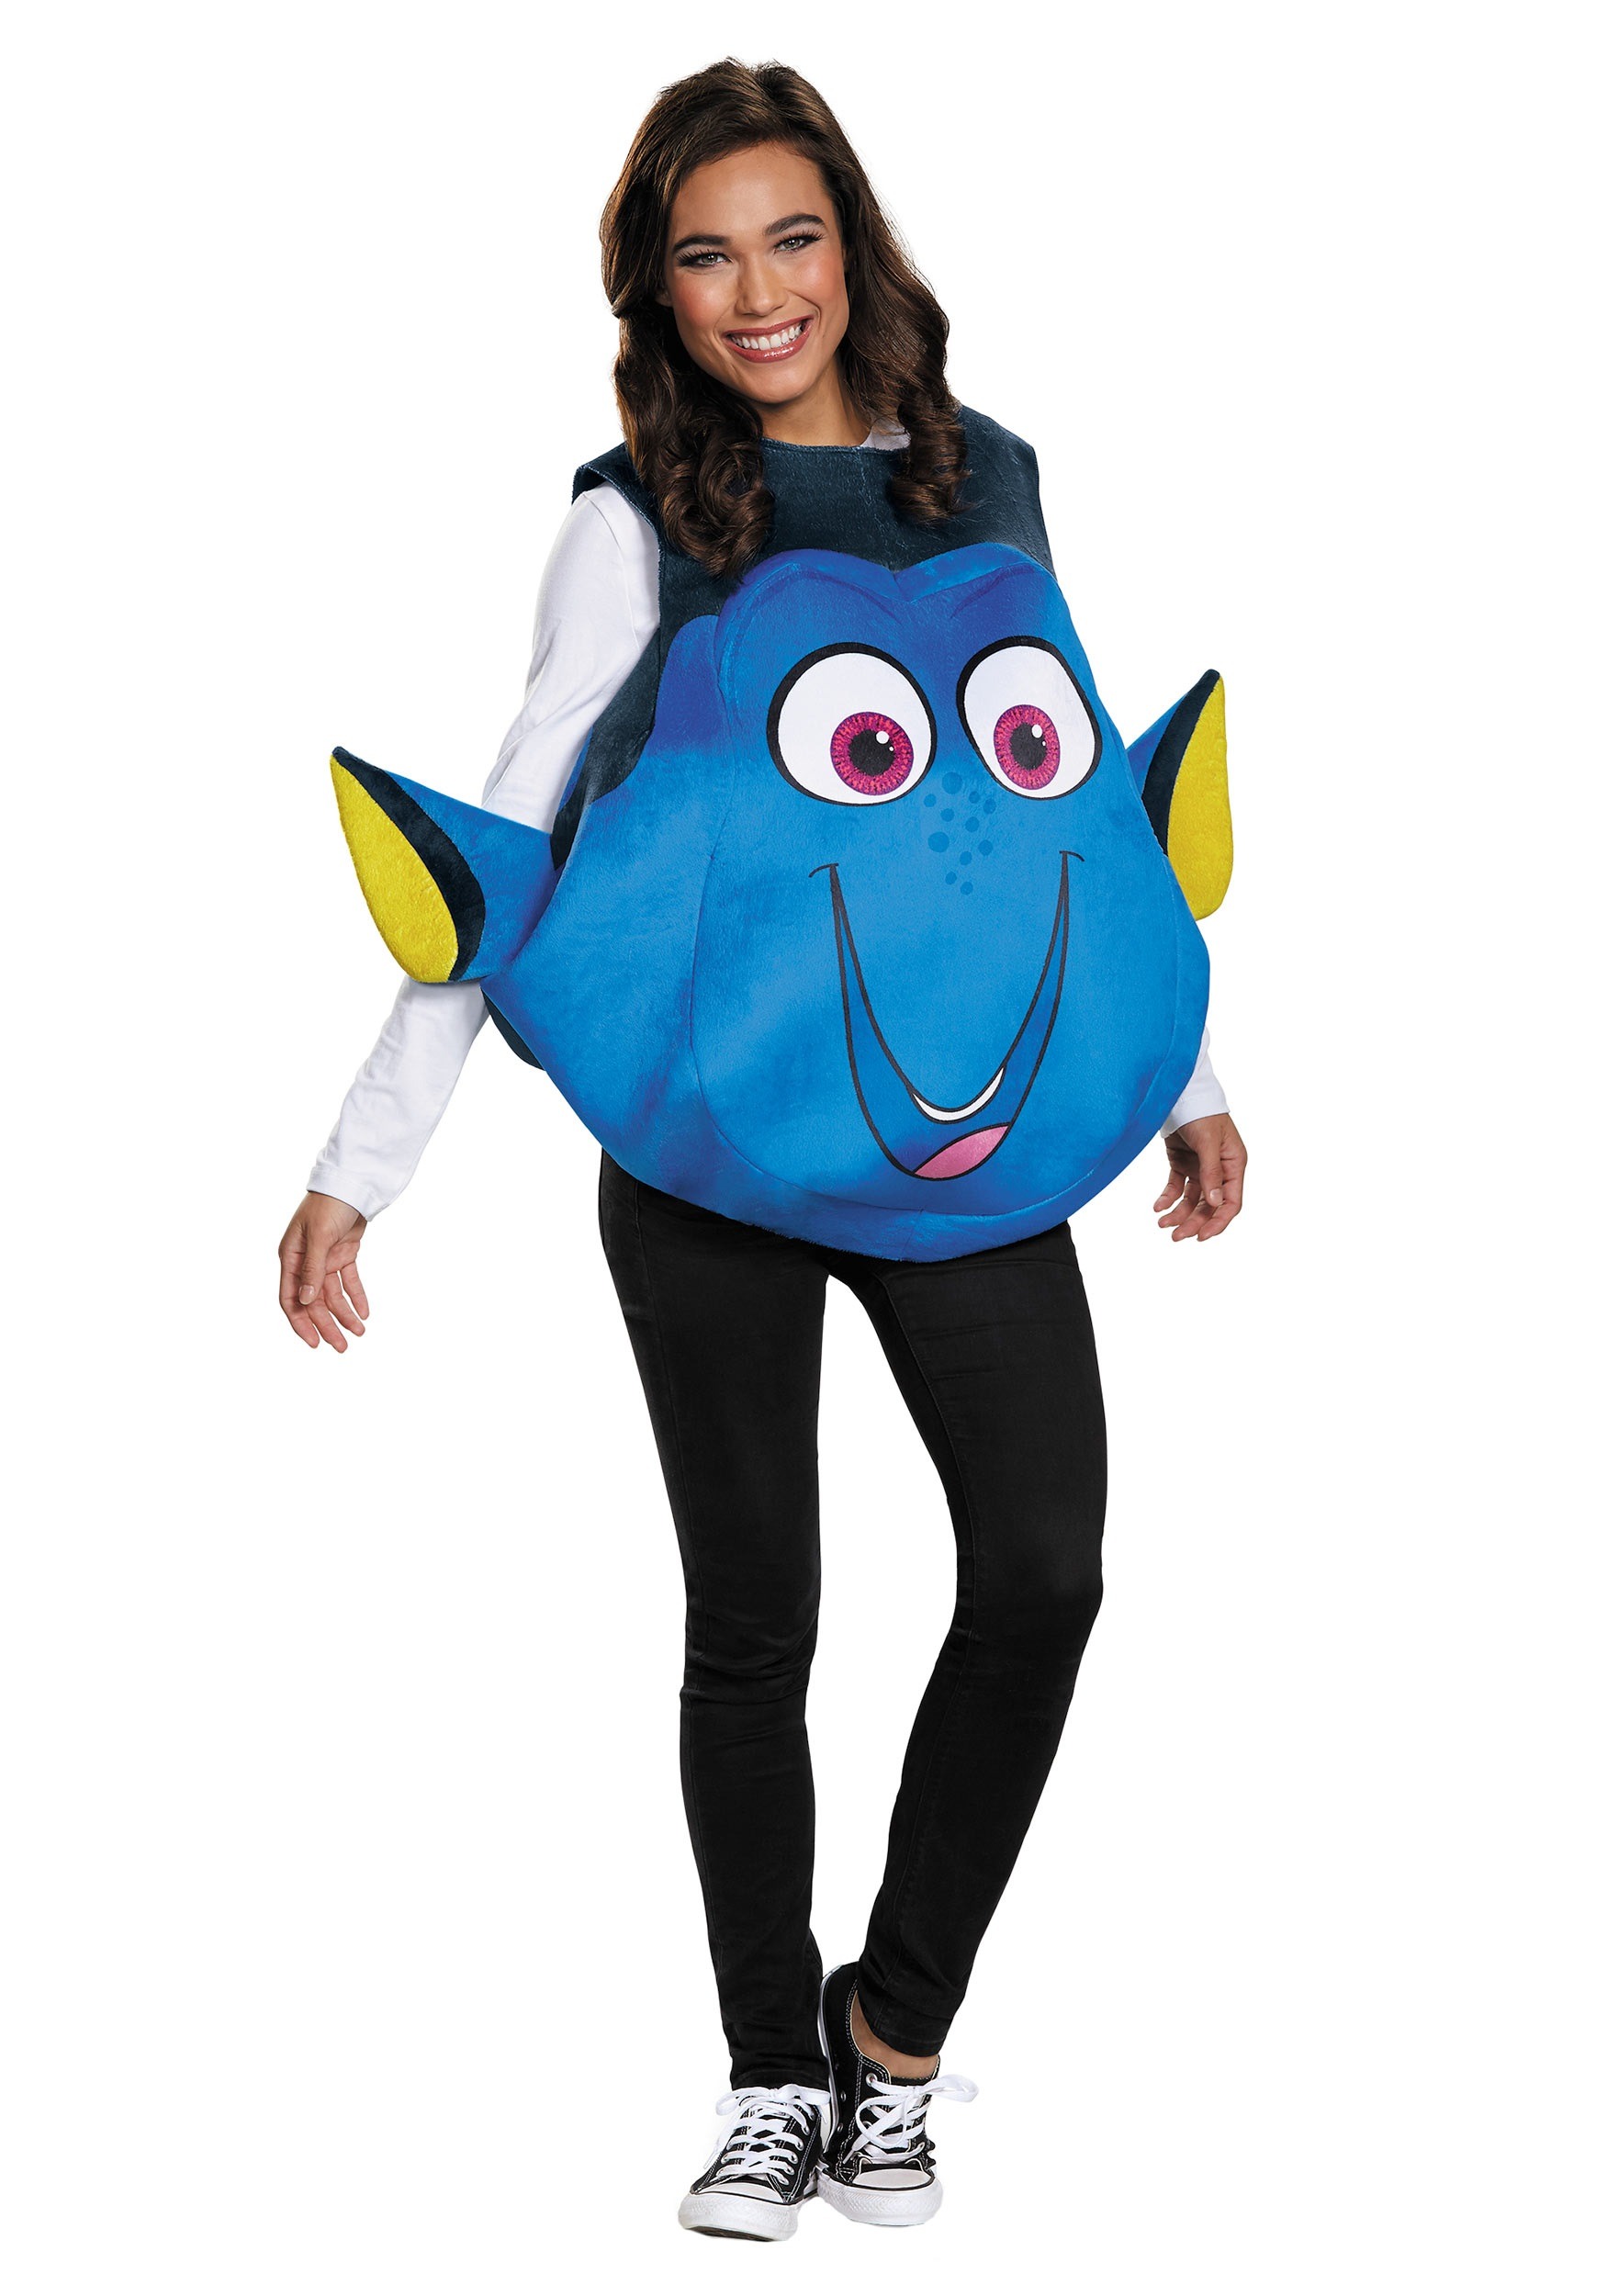 Dory Fish Costume from Finding Dory for Adults